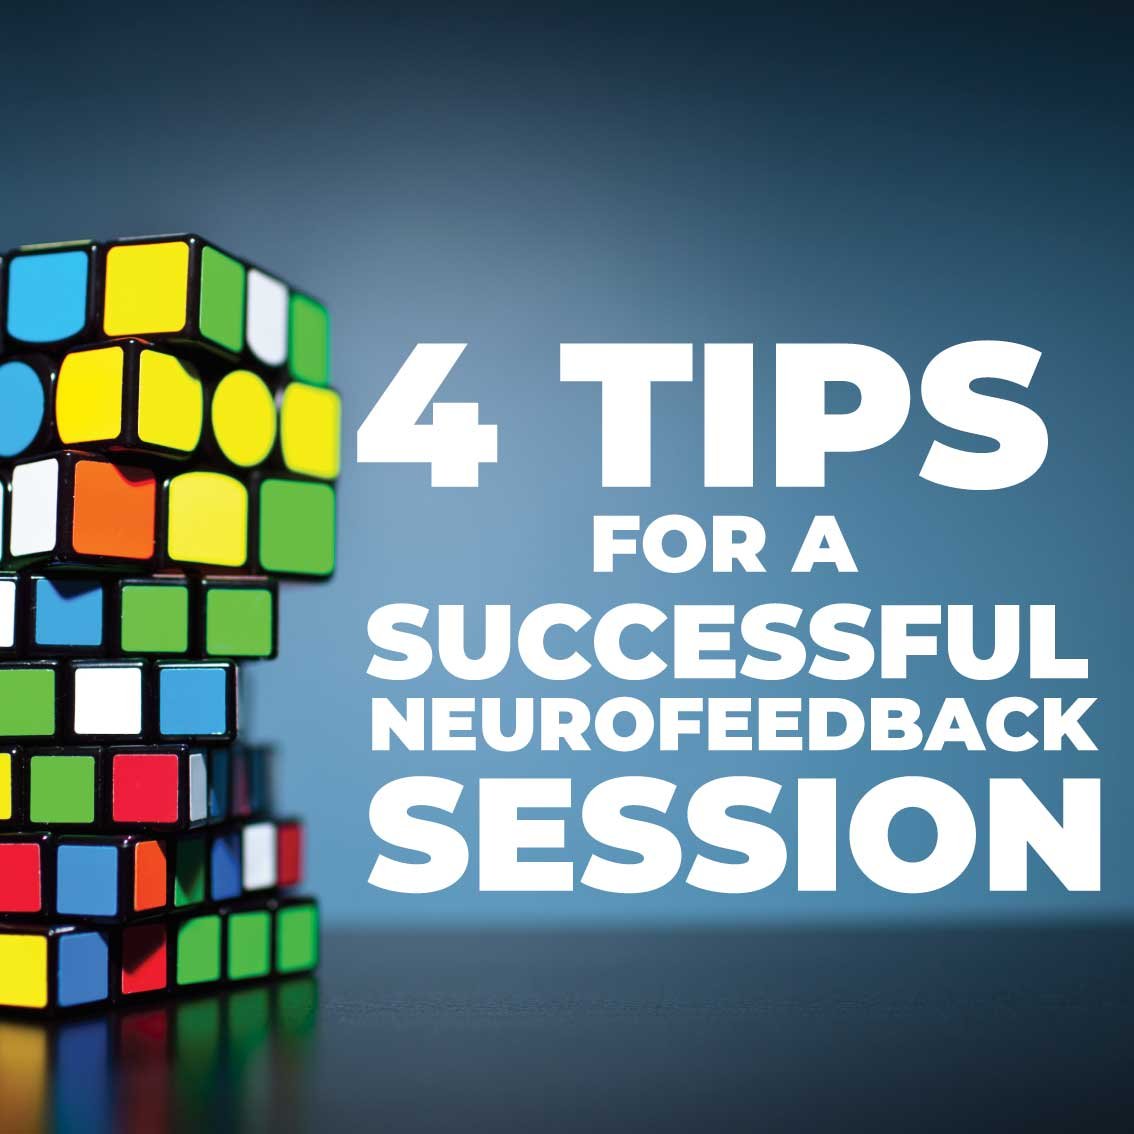 4 tips for a successful neurofeedback session